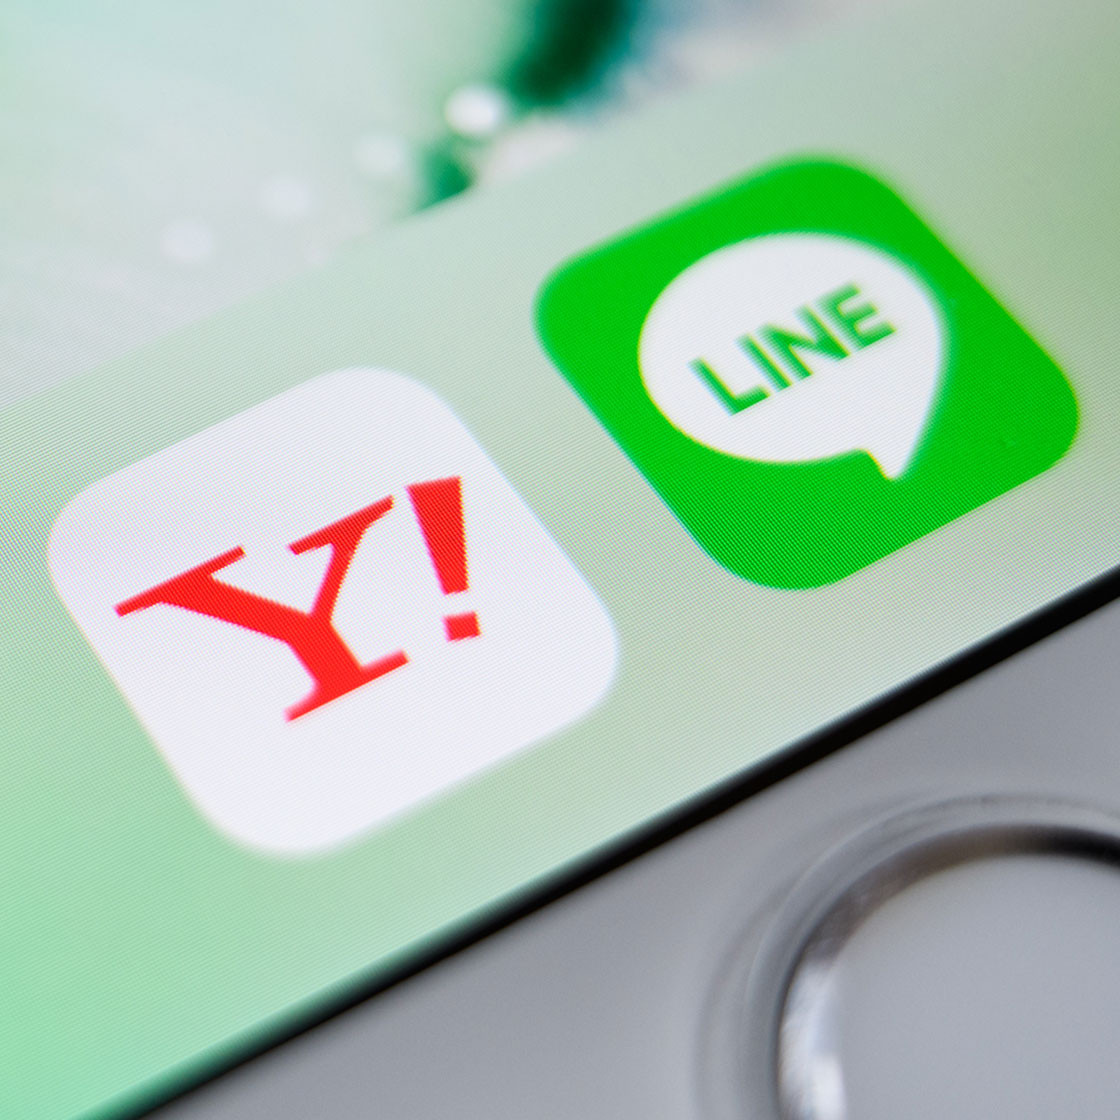 Can the Yahoo Japan-Line merger upend the global tech landscape?